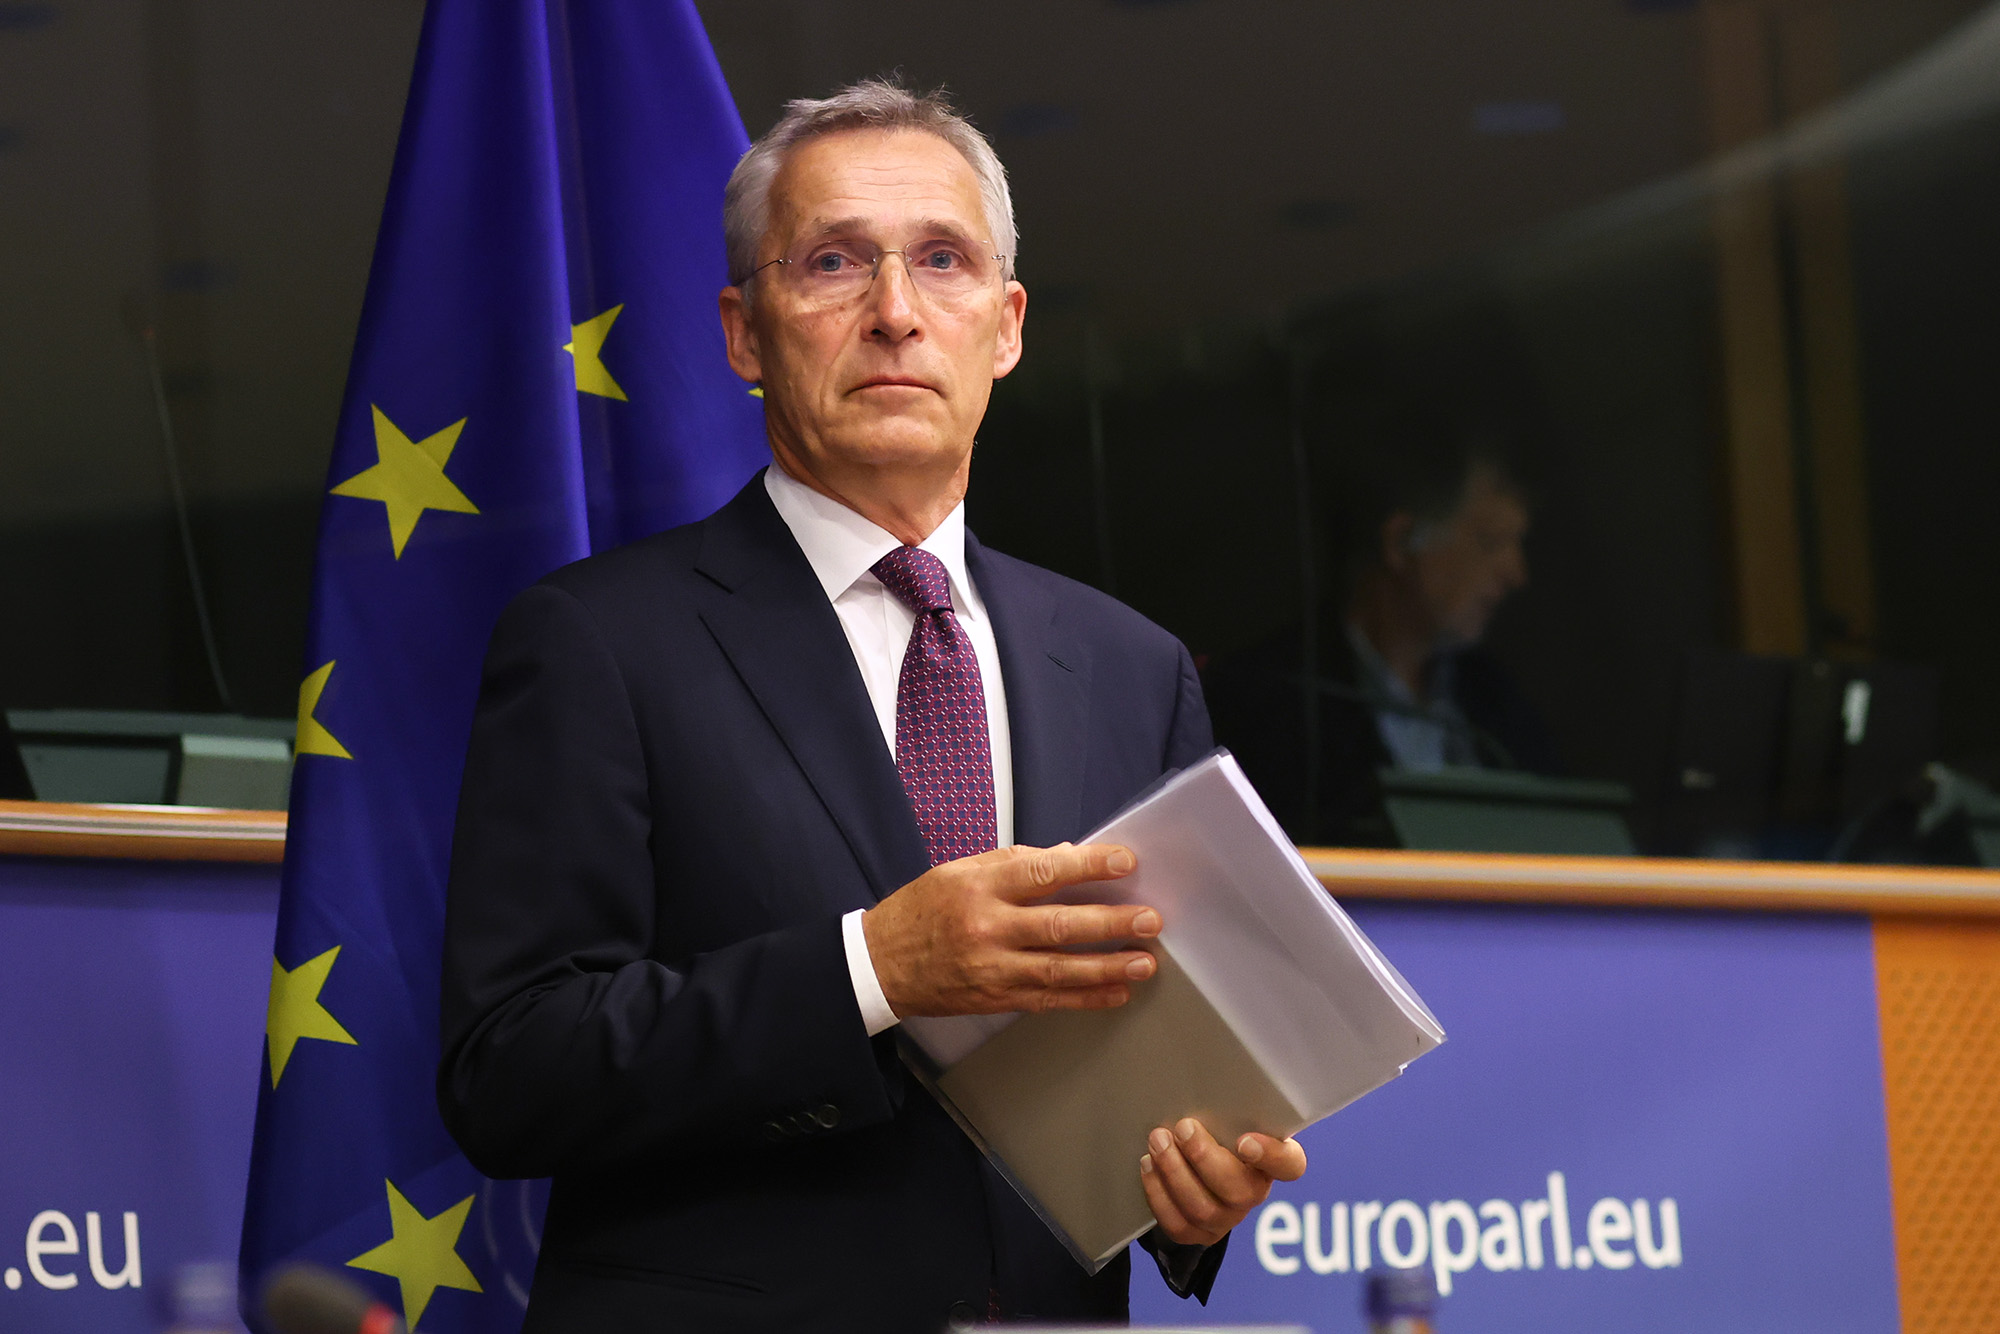 NATO Secretary General Jens Stoltenberg attends a hearing by the European Parliament Committee on Foreign Affairs and the Subcommittee on Security and Defence in Brussels, Belgium, on September 7.